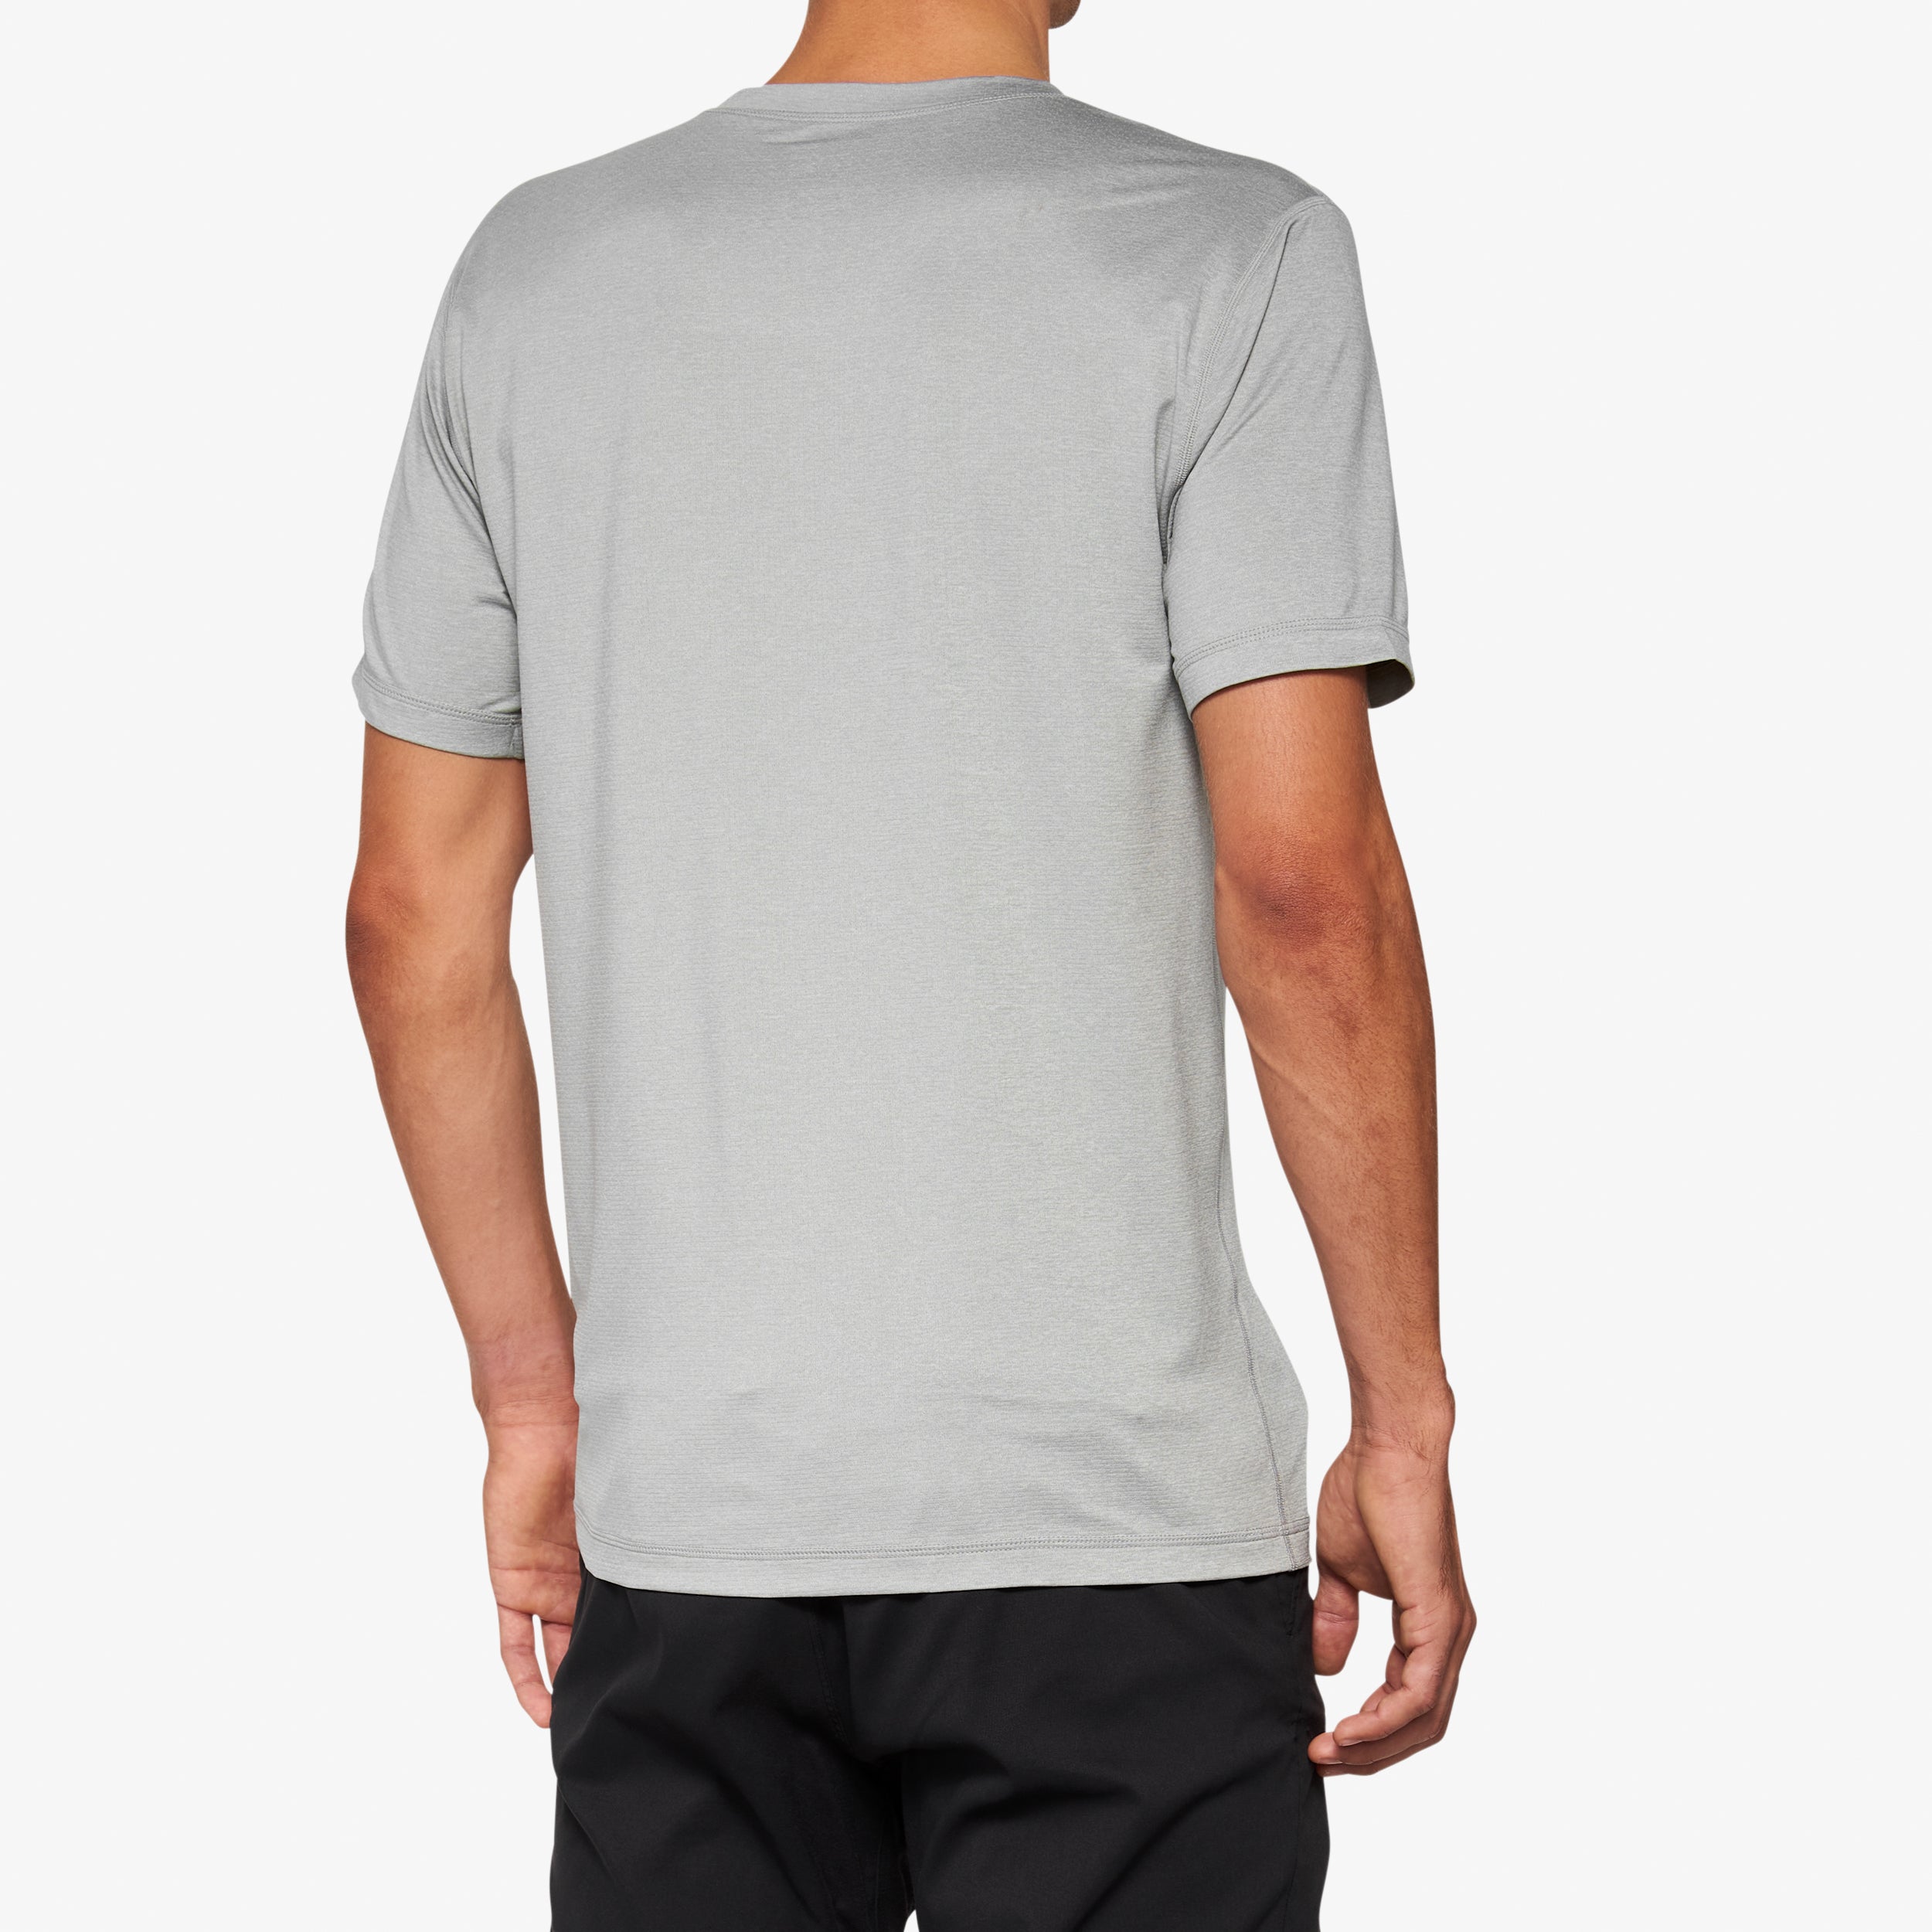 MISSION Athletic Short Sleeve Tee Heather Grey - Secondary